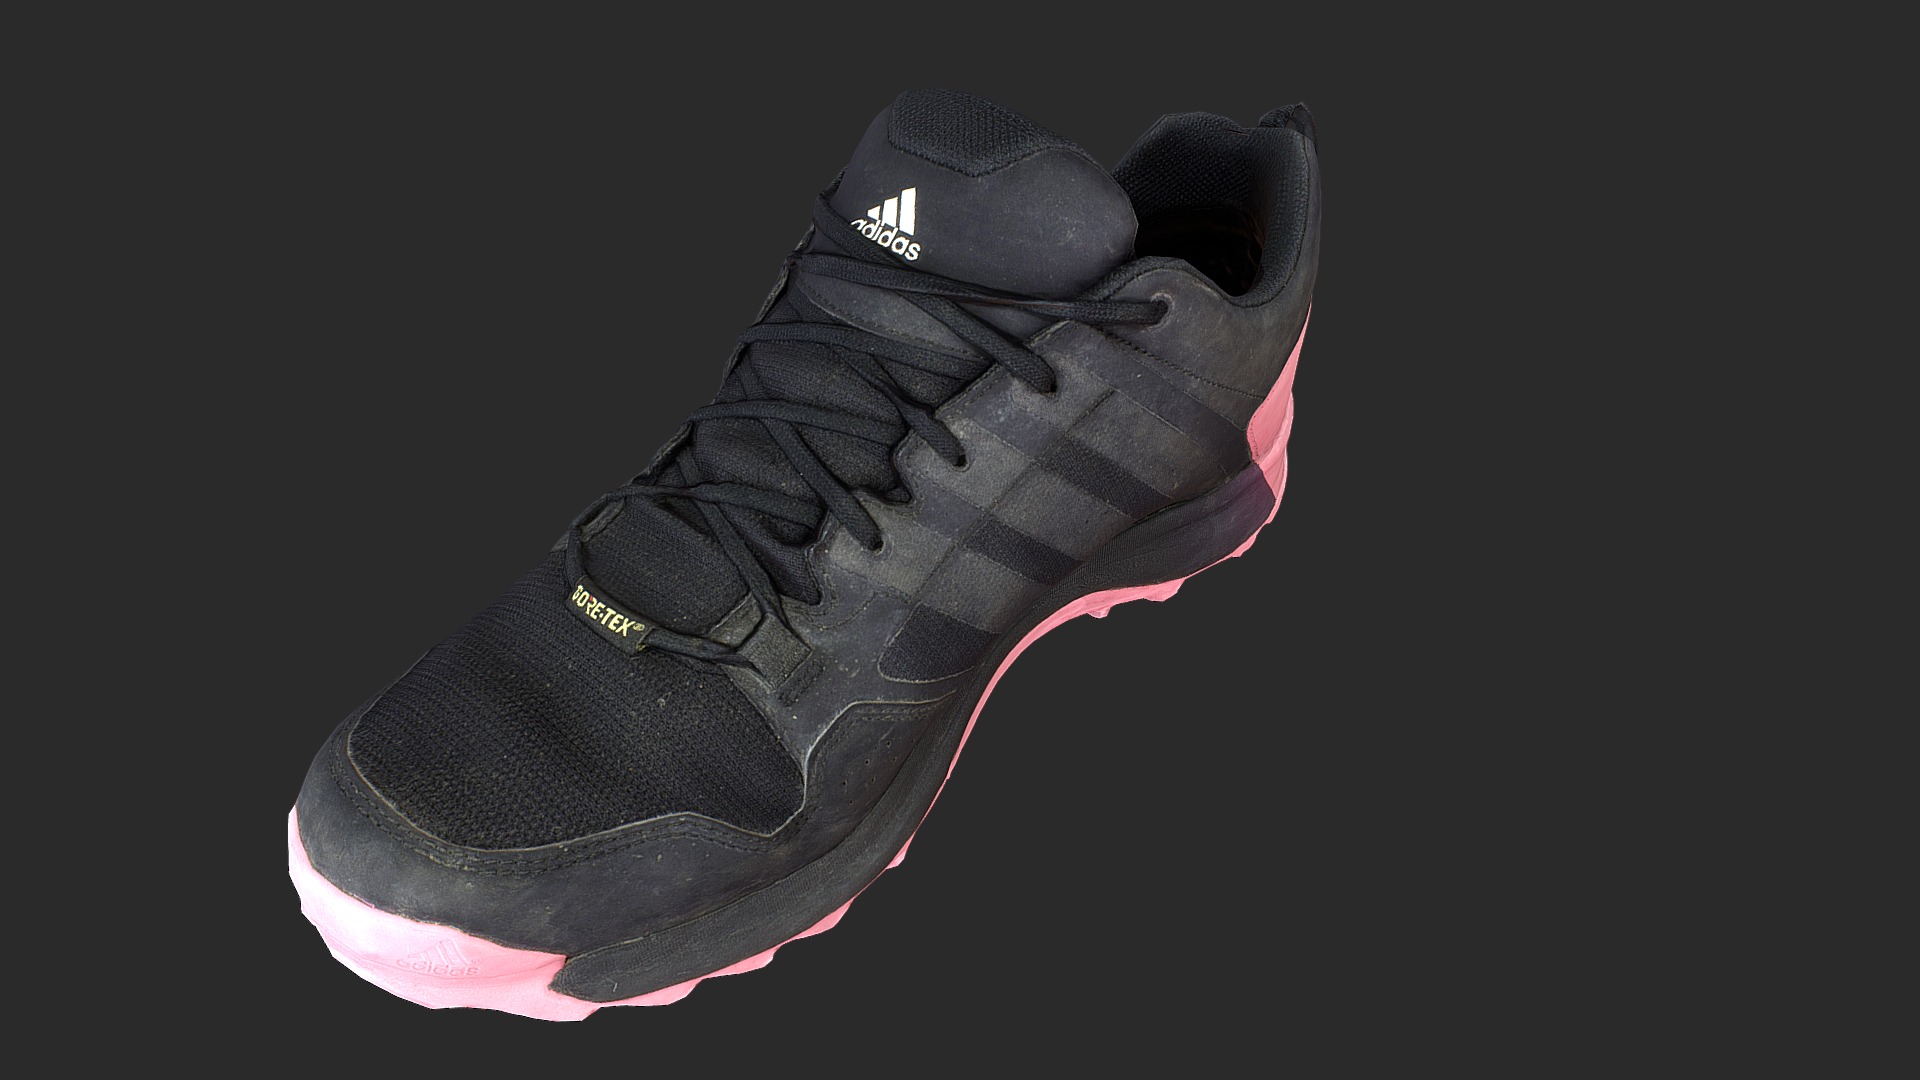 3D model Adidas sneaker shoe low poly - This is a 3D model of the Adidas sneaker shoe low poly. The 3D model is about a black shoe with a red lace.